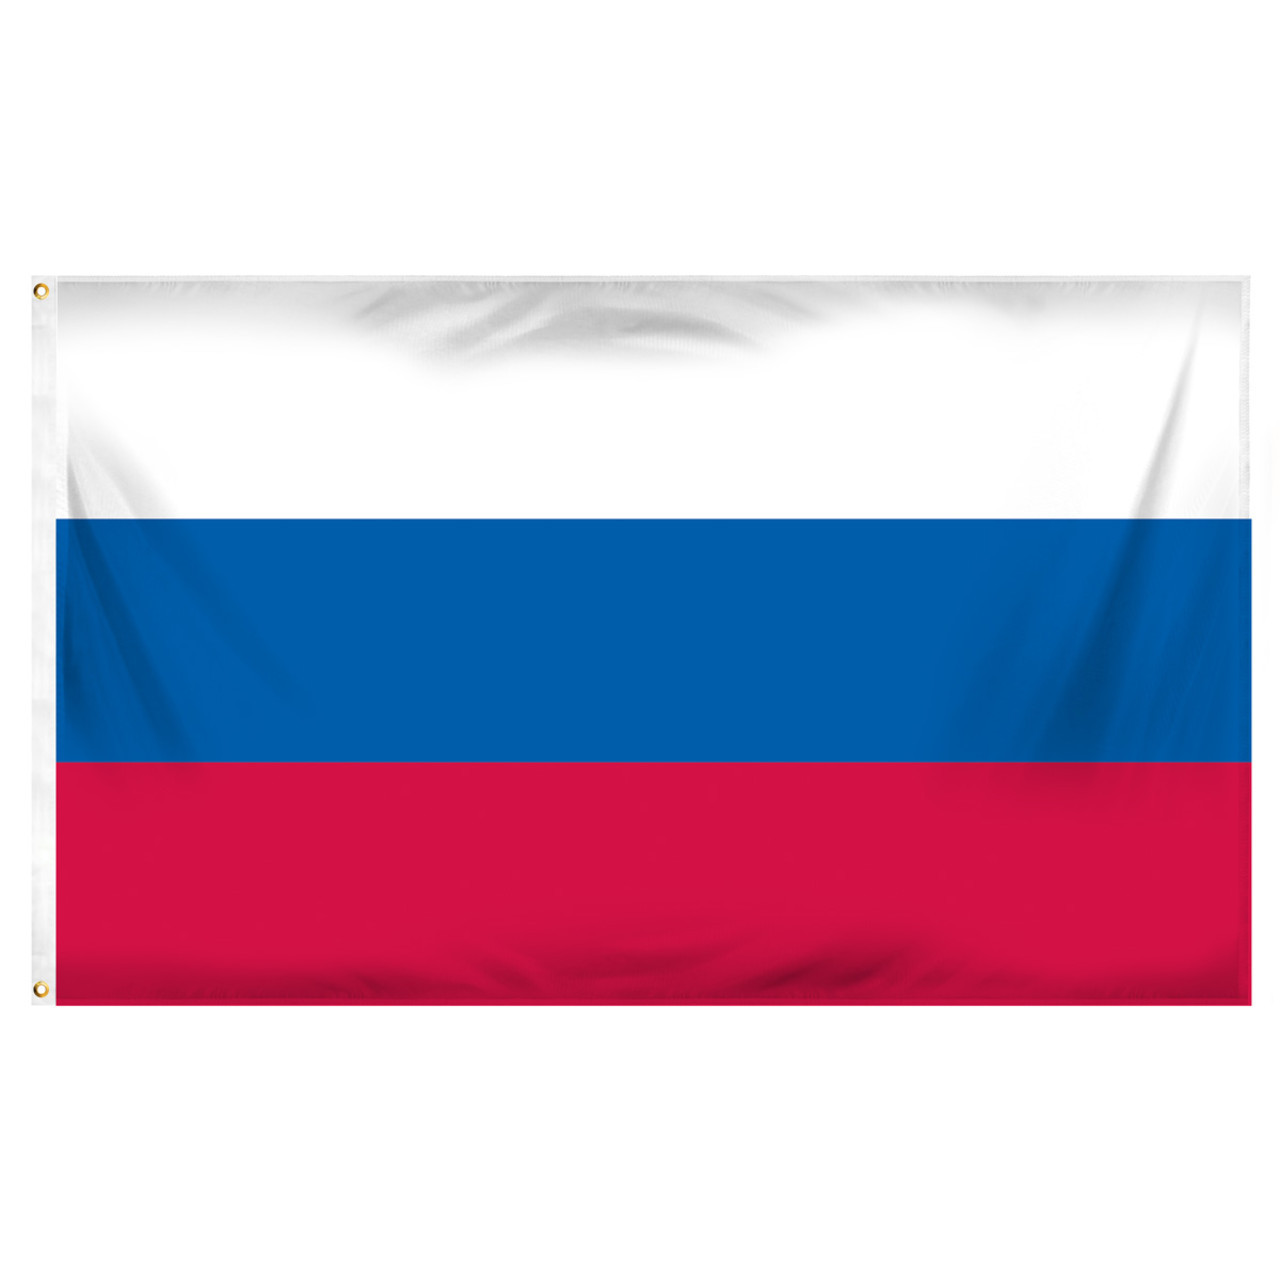 3-ft. x 5-ft. Russia Printed Polyester Flag